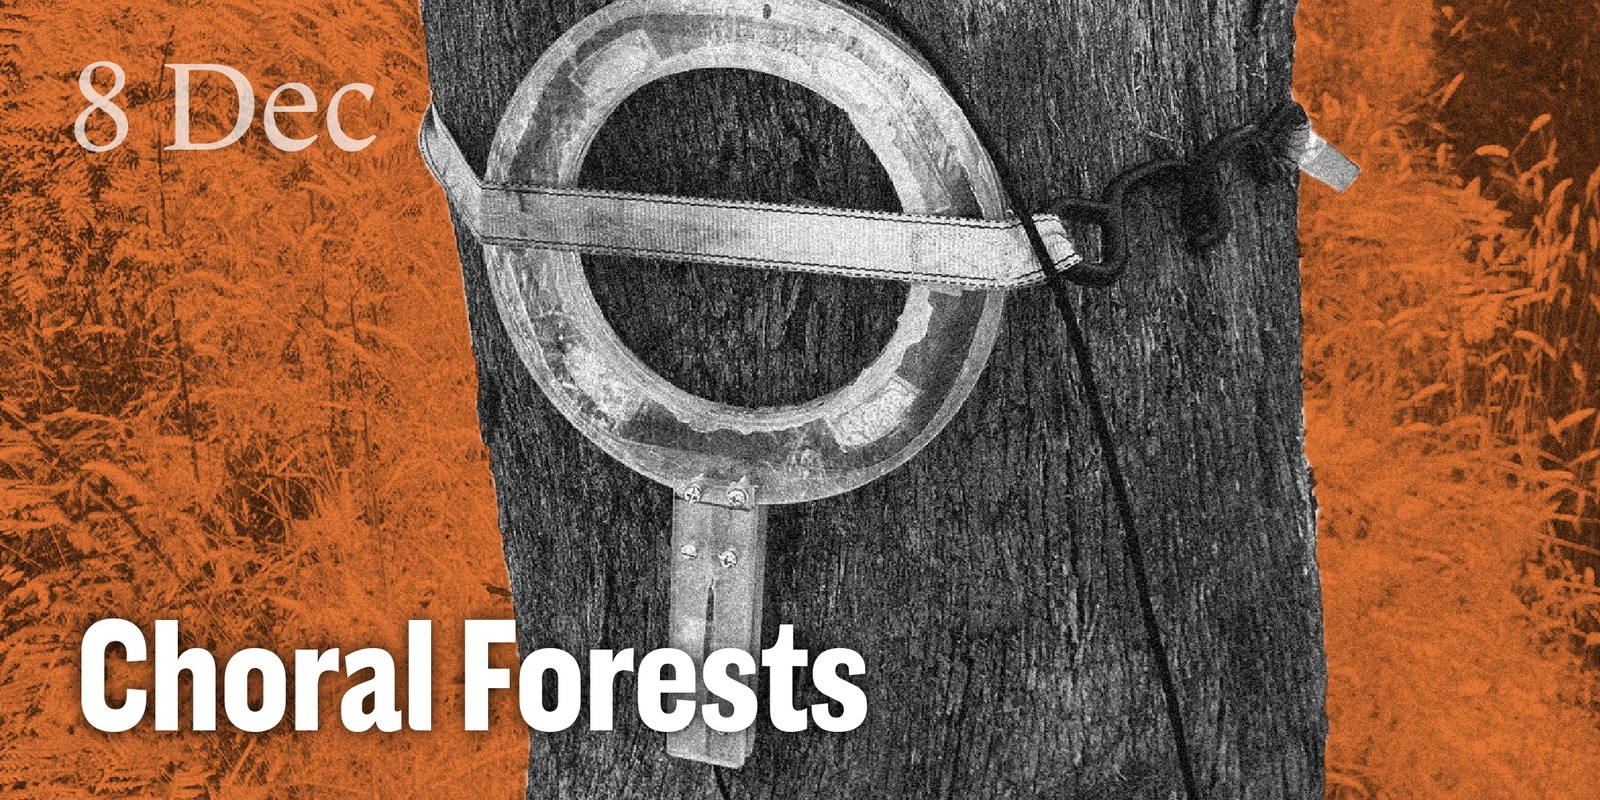 Banner image for Choral Forests